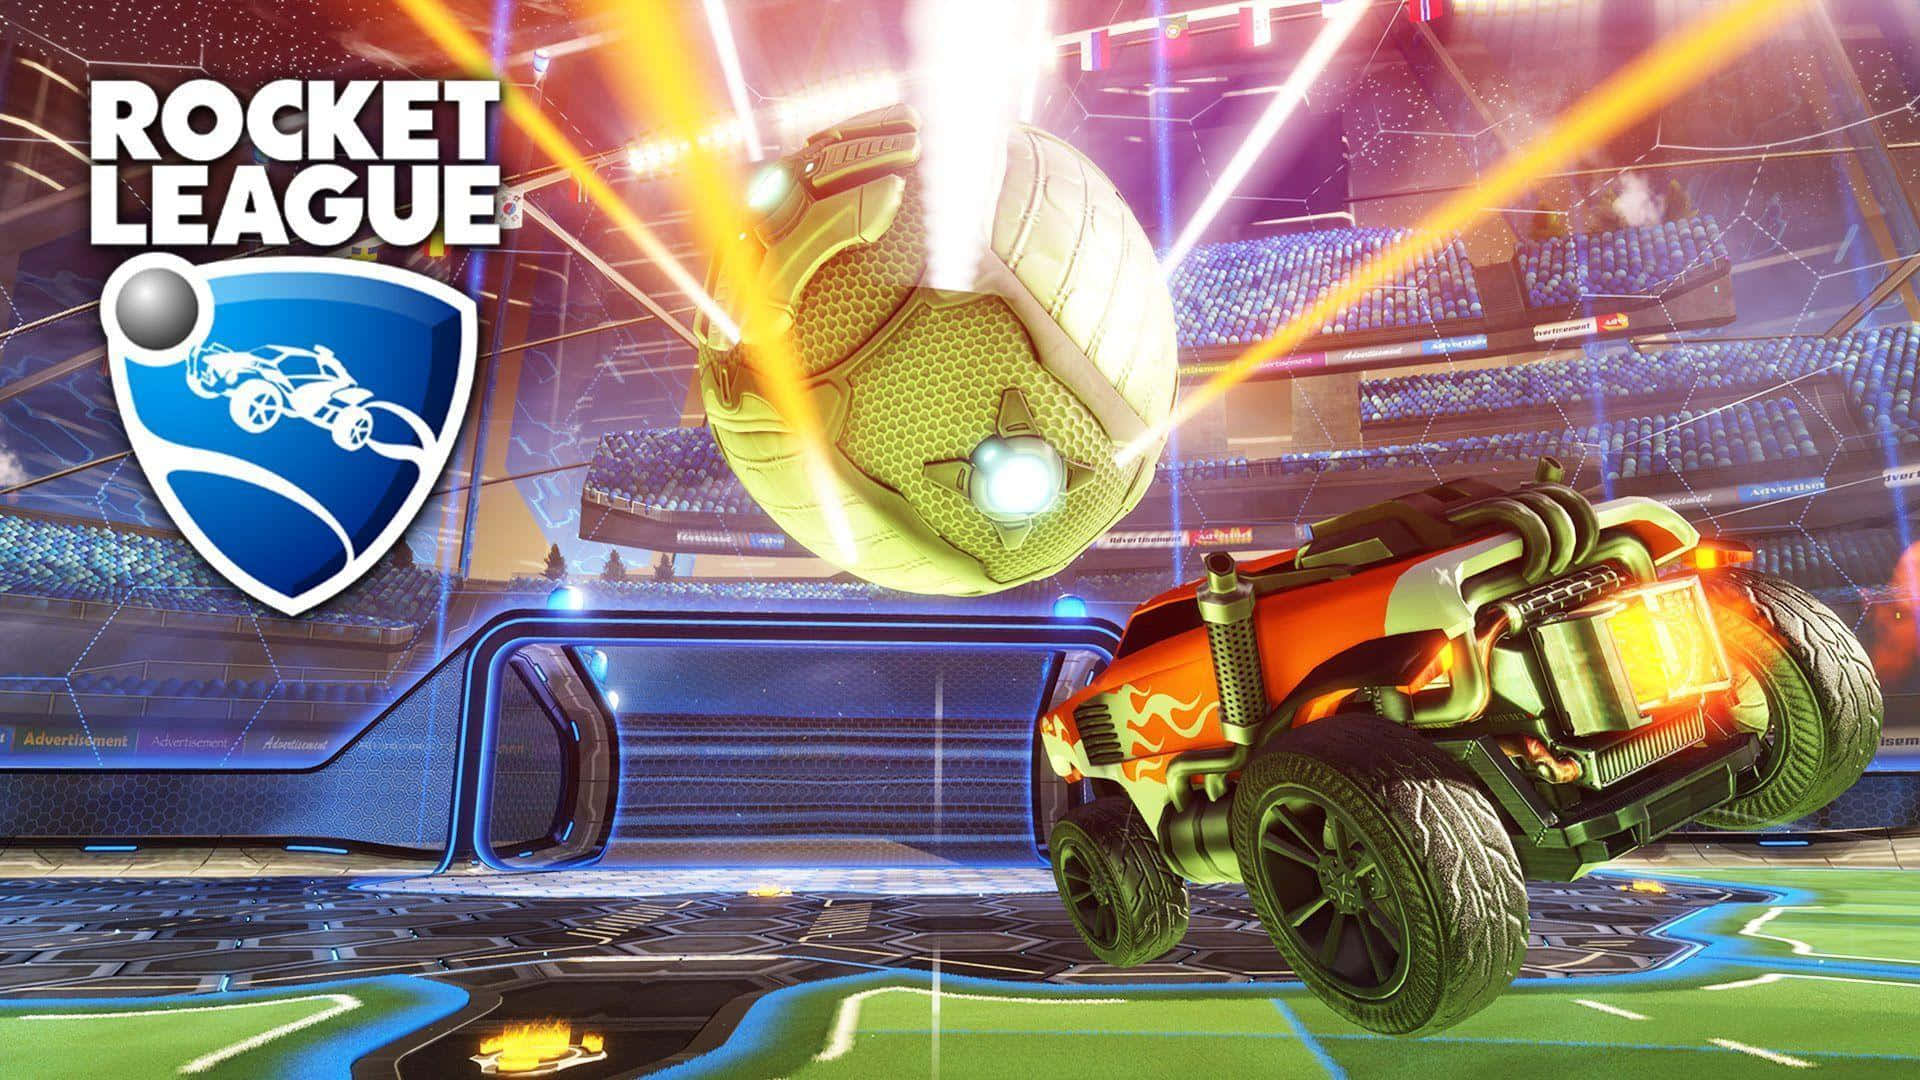 Get Ready to Take on the Best Rocket League Experience